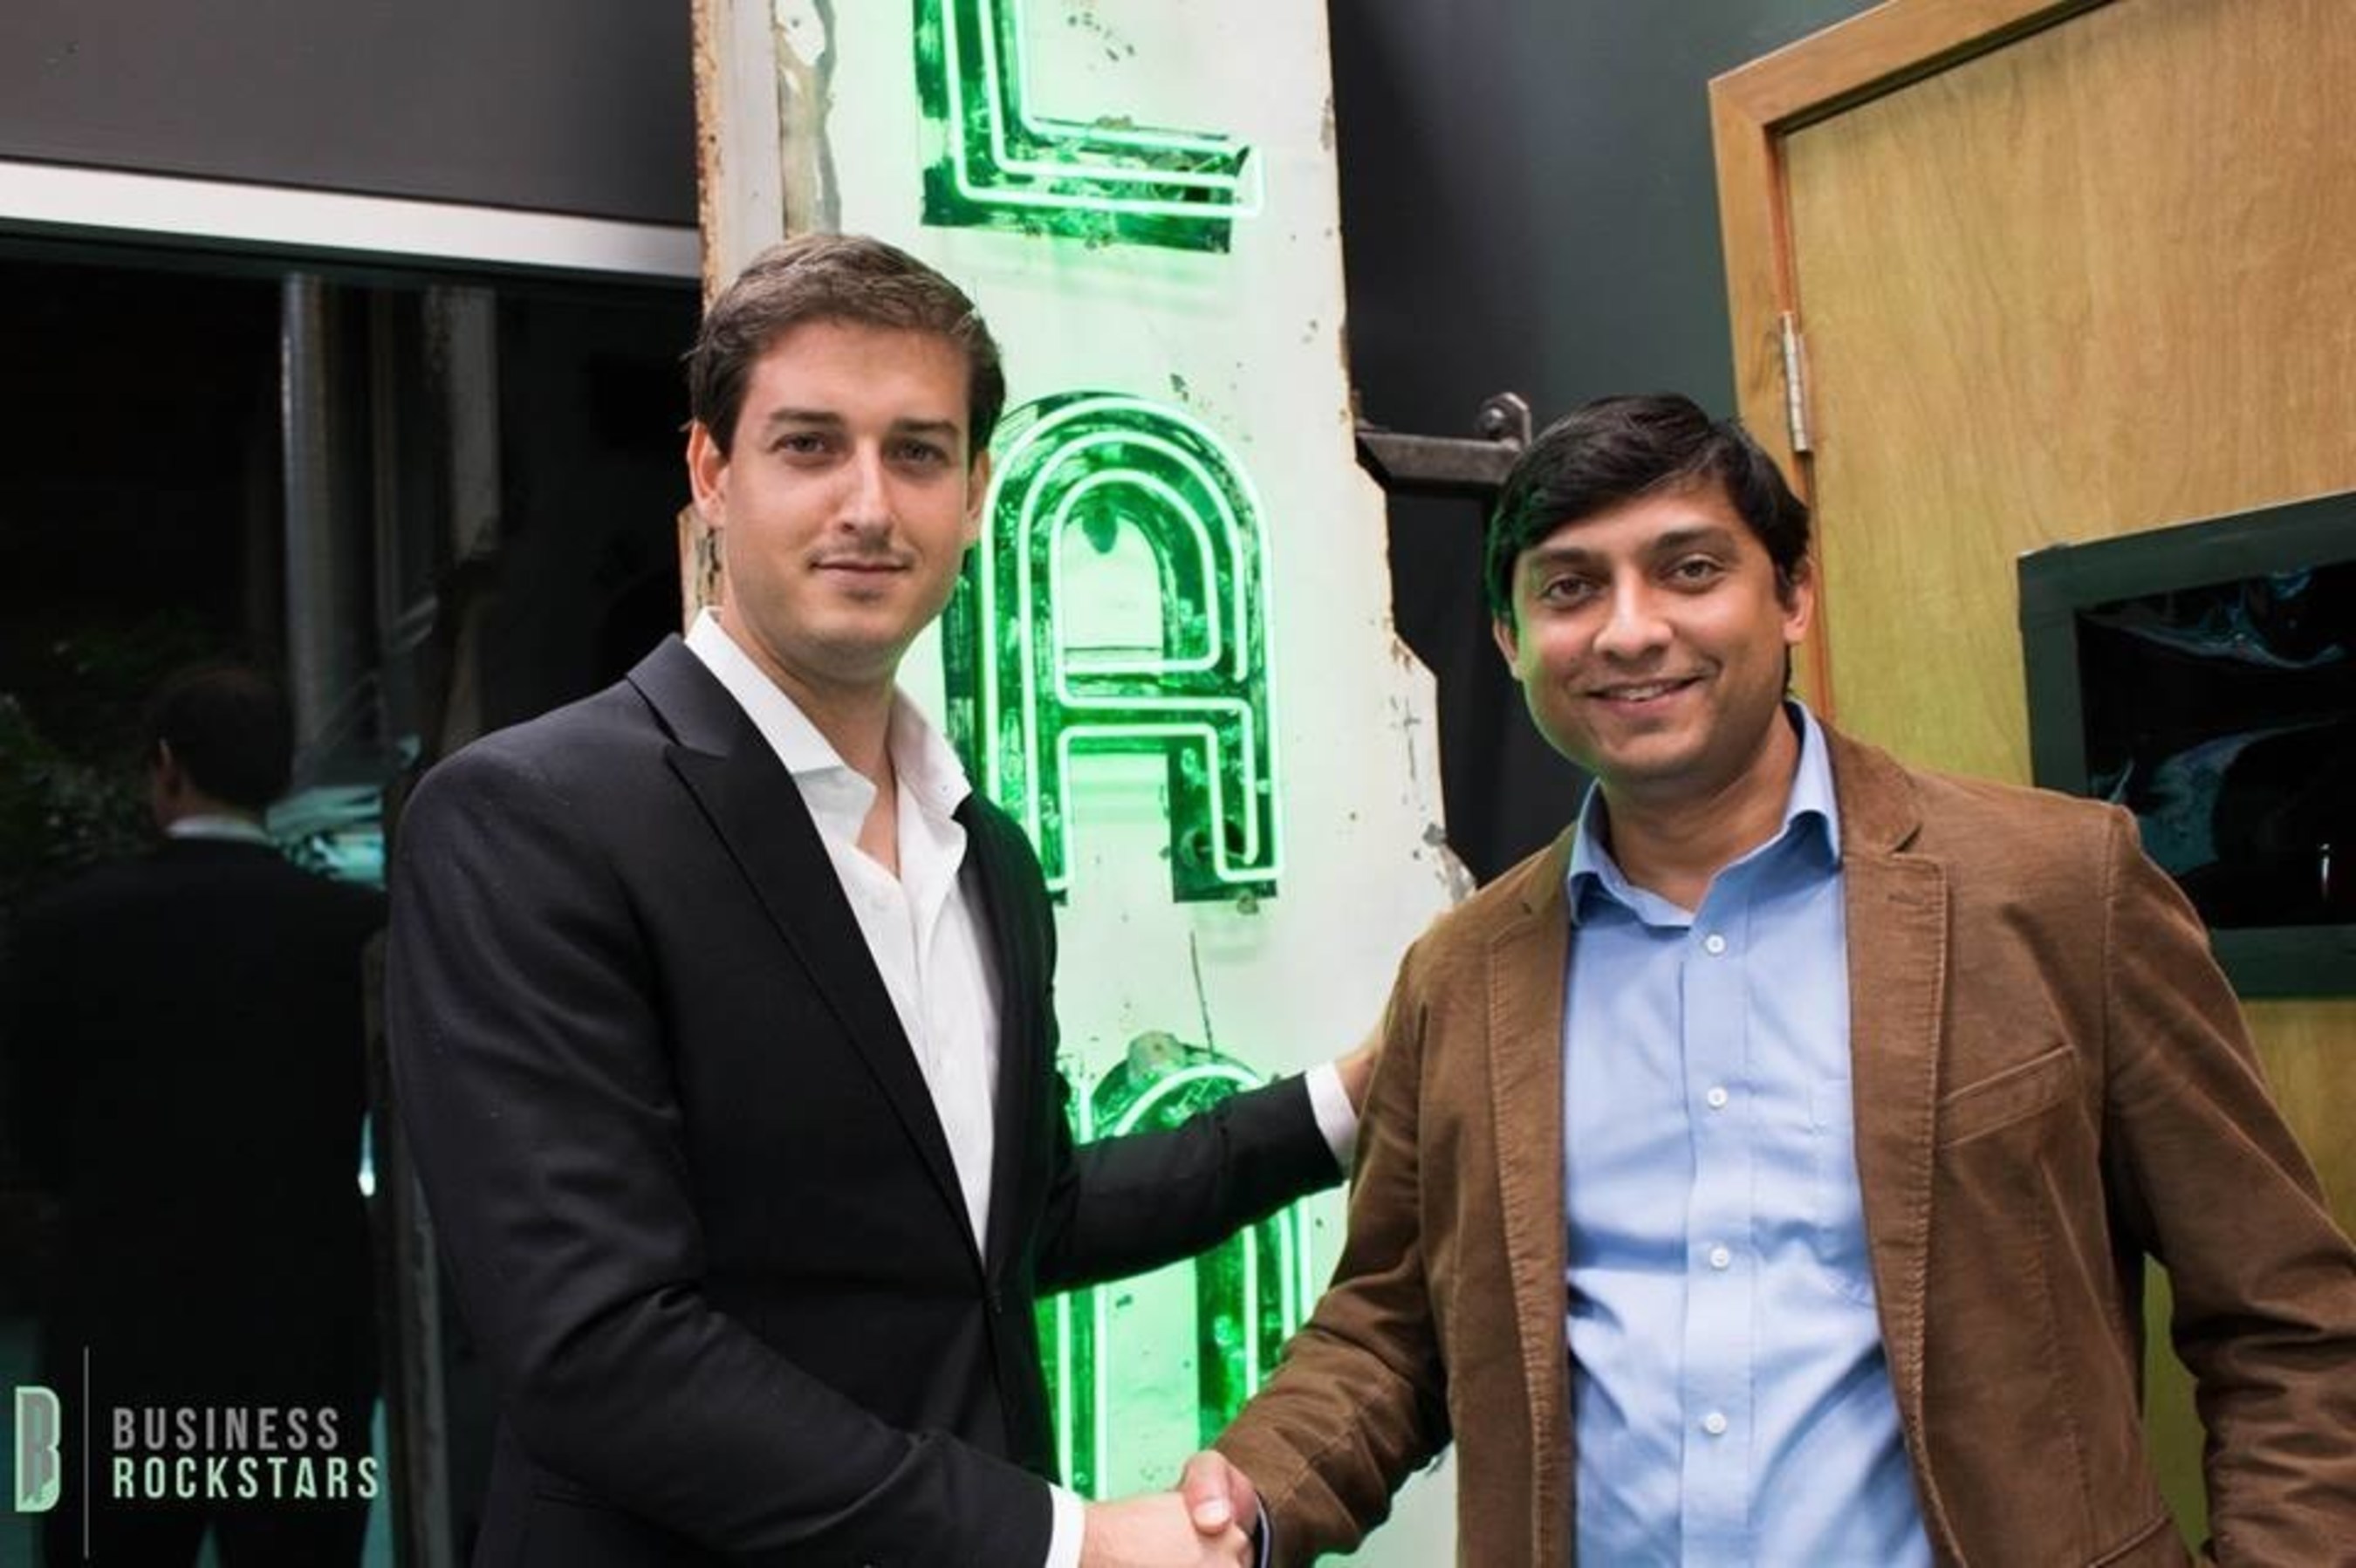 Jordan French, engineer and founding CMO at BeeHex, Inc. 3D printing, with tech celebrity and BeeHex CEO Anjan Contractor